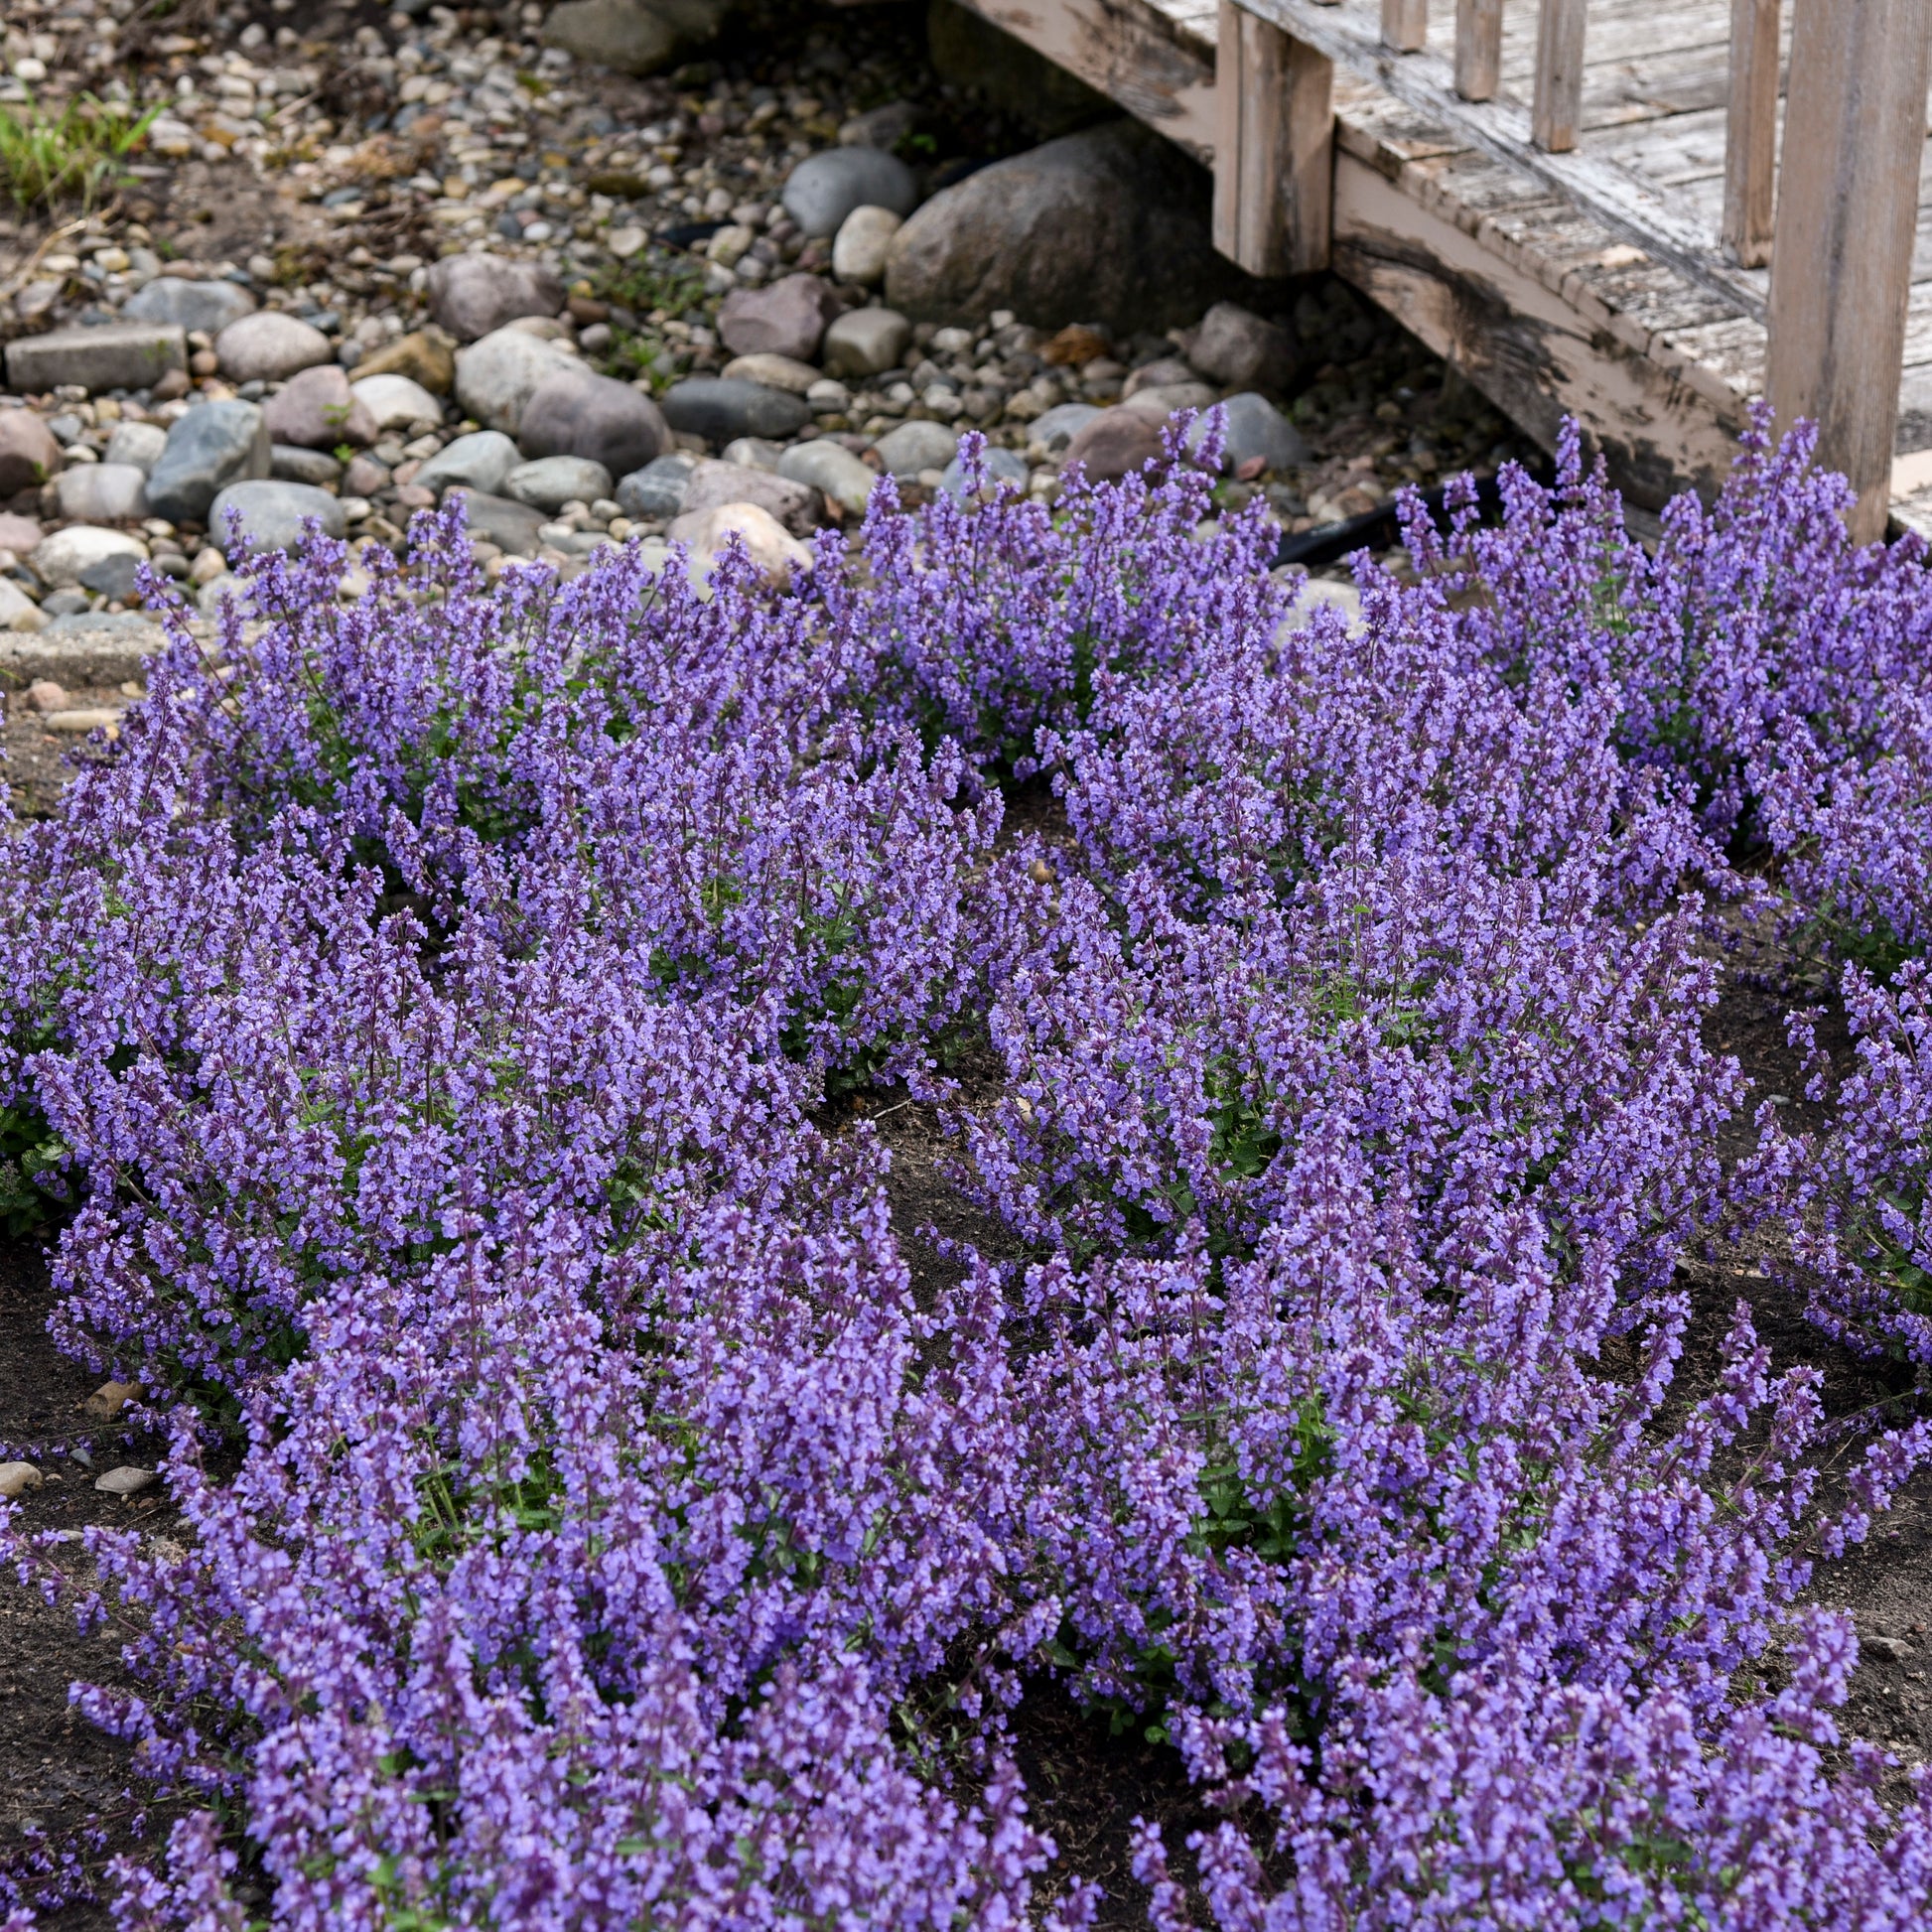 Catmint (Nepeta 'Cat's Pajamas') in the Catmints Database 